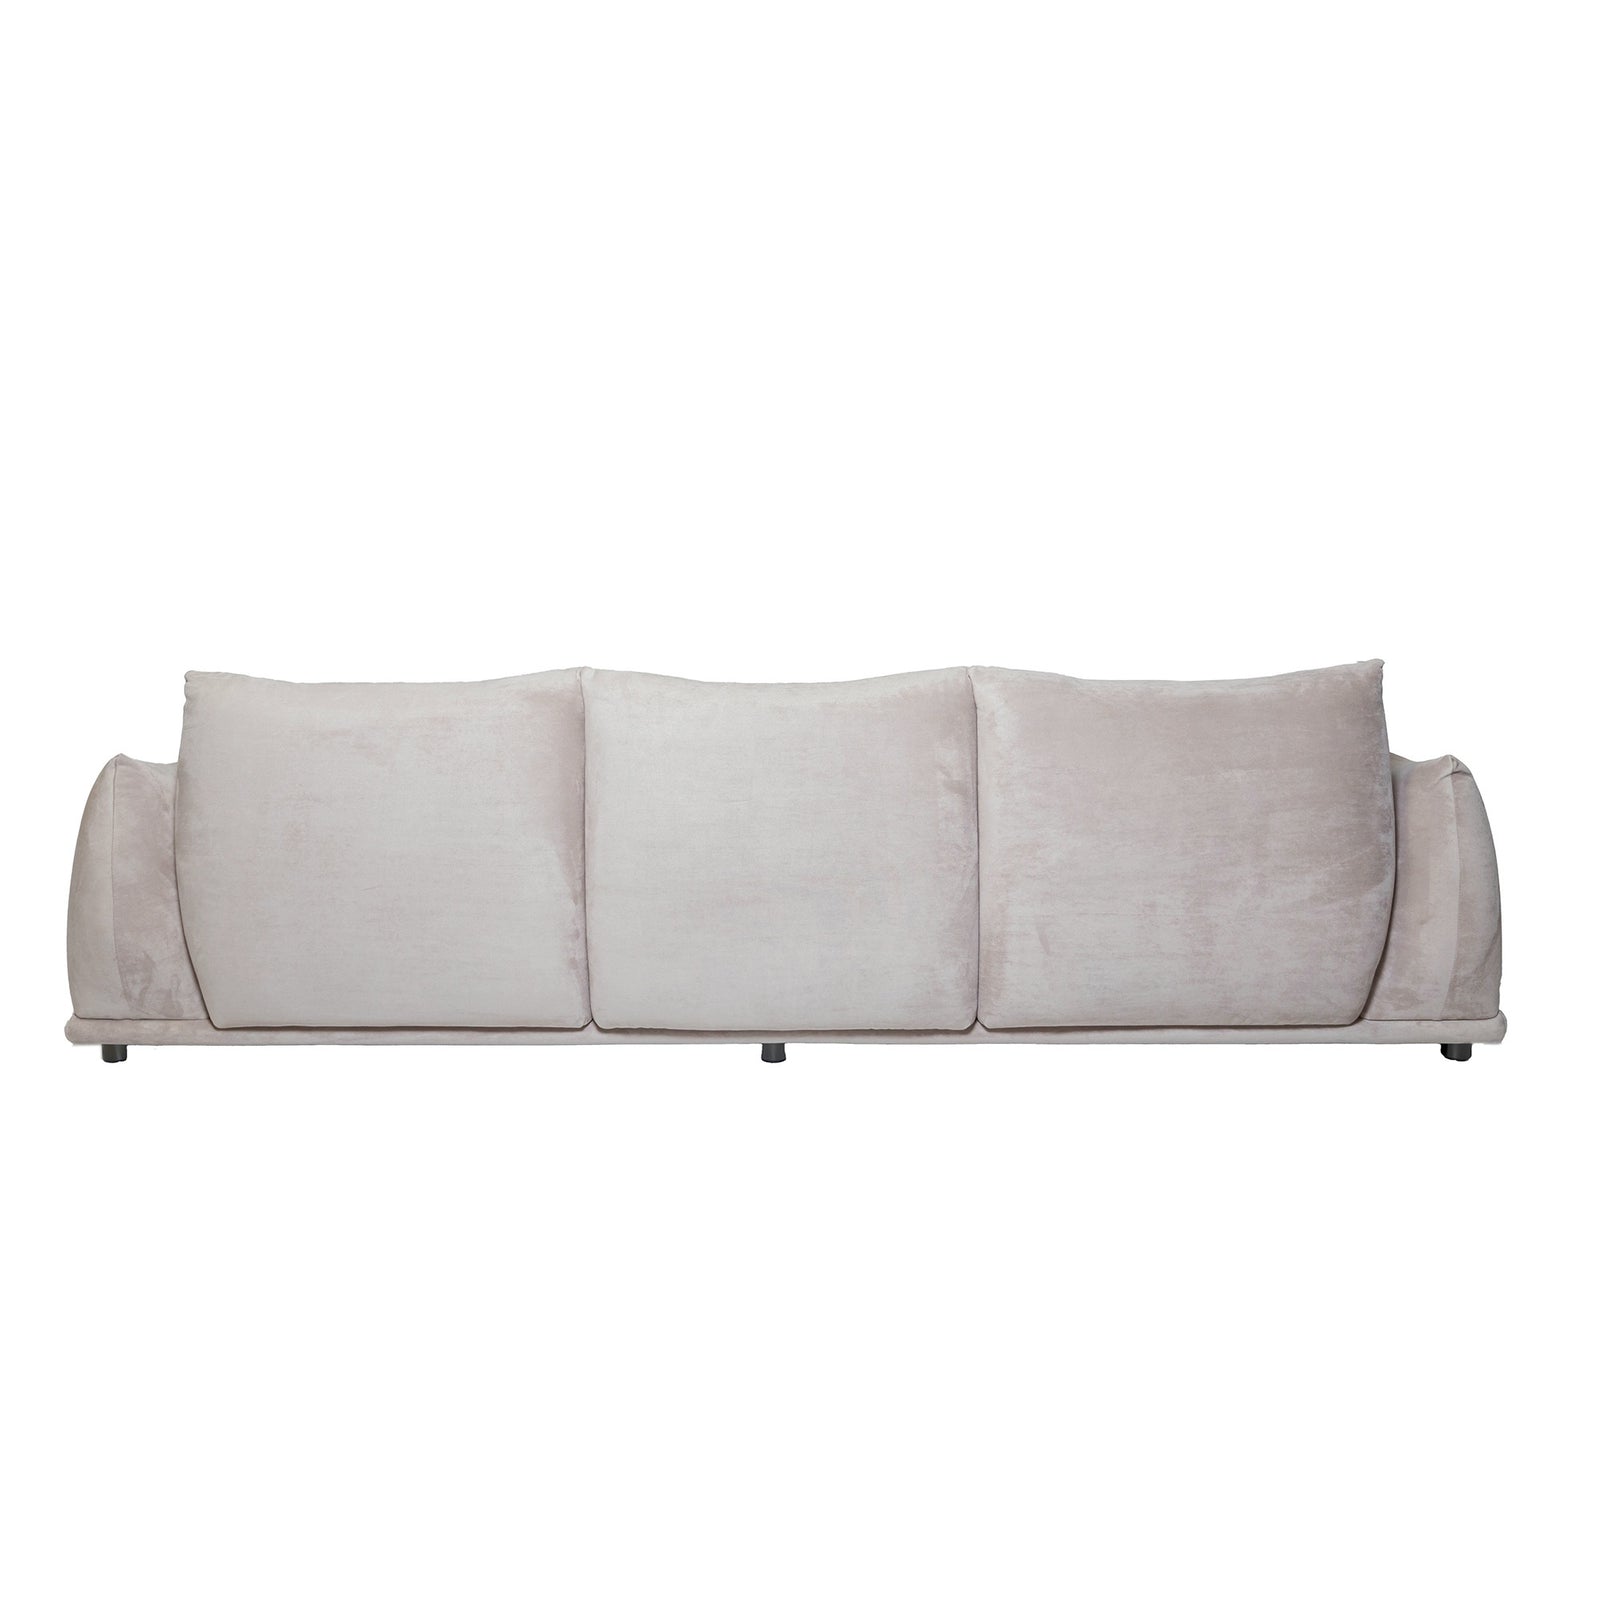 Marenco Style Sofa Light Grey Suede 3 Seater